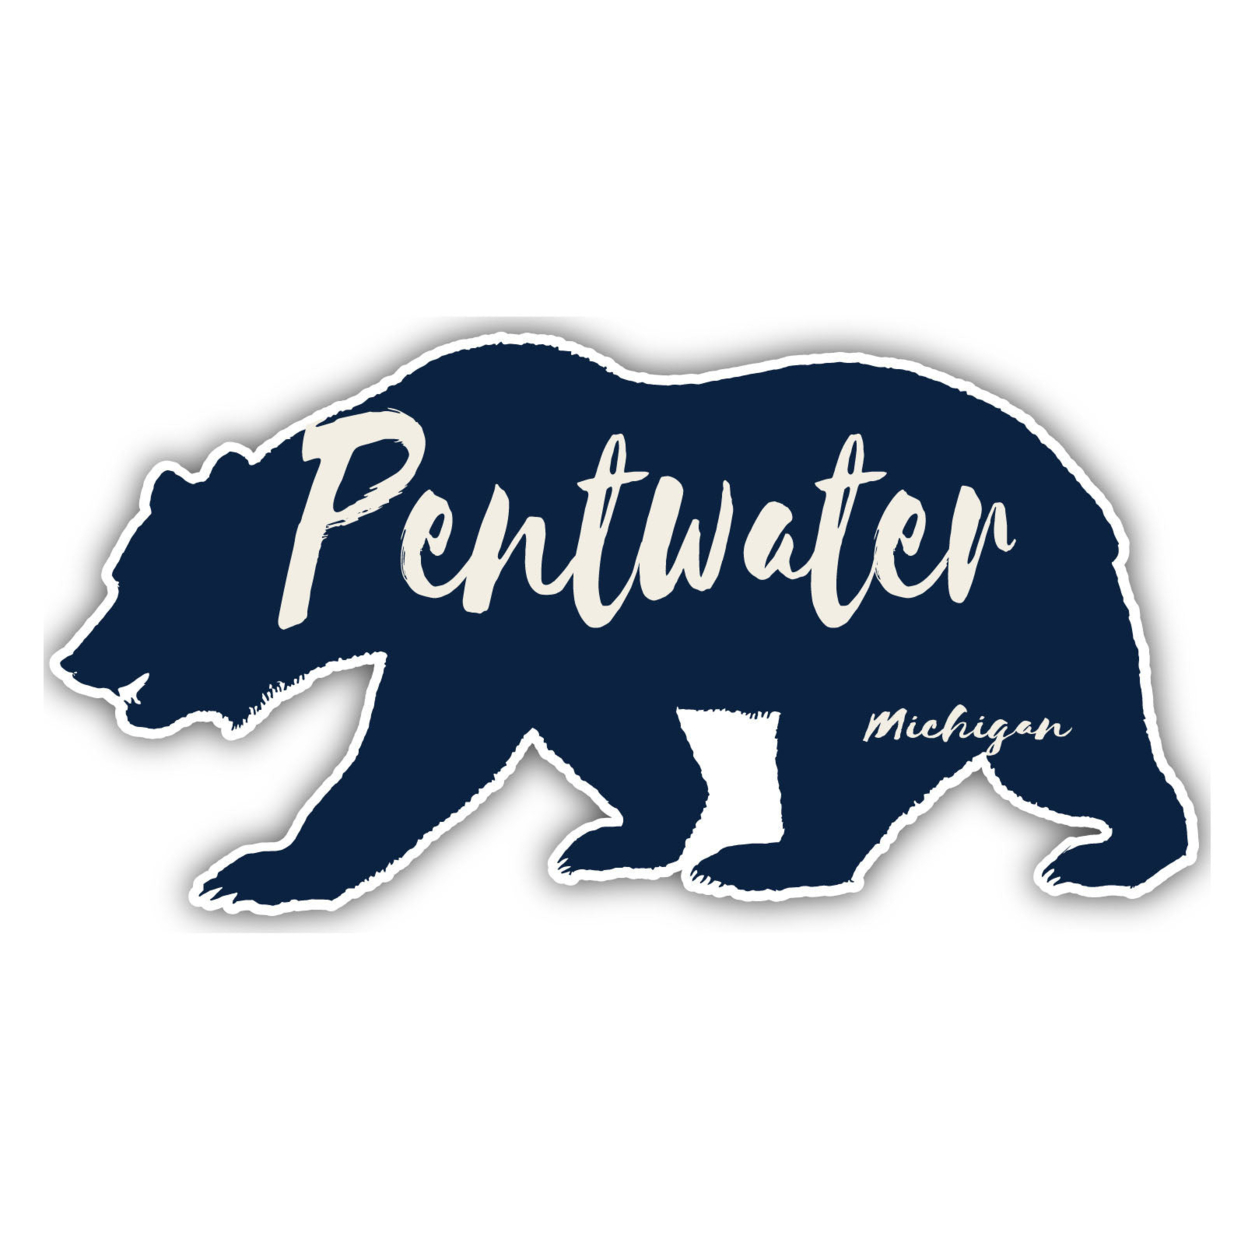 Pentwater Michigan Souvenir Decorative Stickers (Choose Theme And Size) - Single Unit, 4-Inch, Camp Life